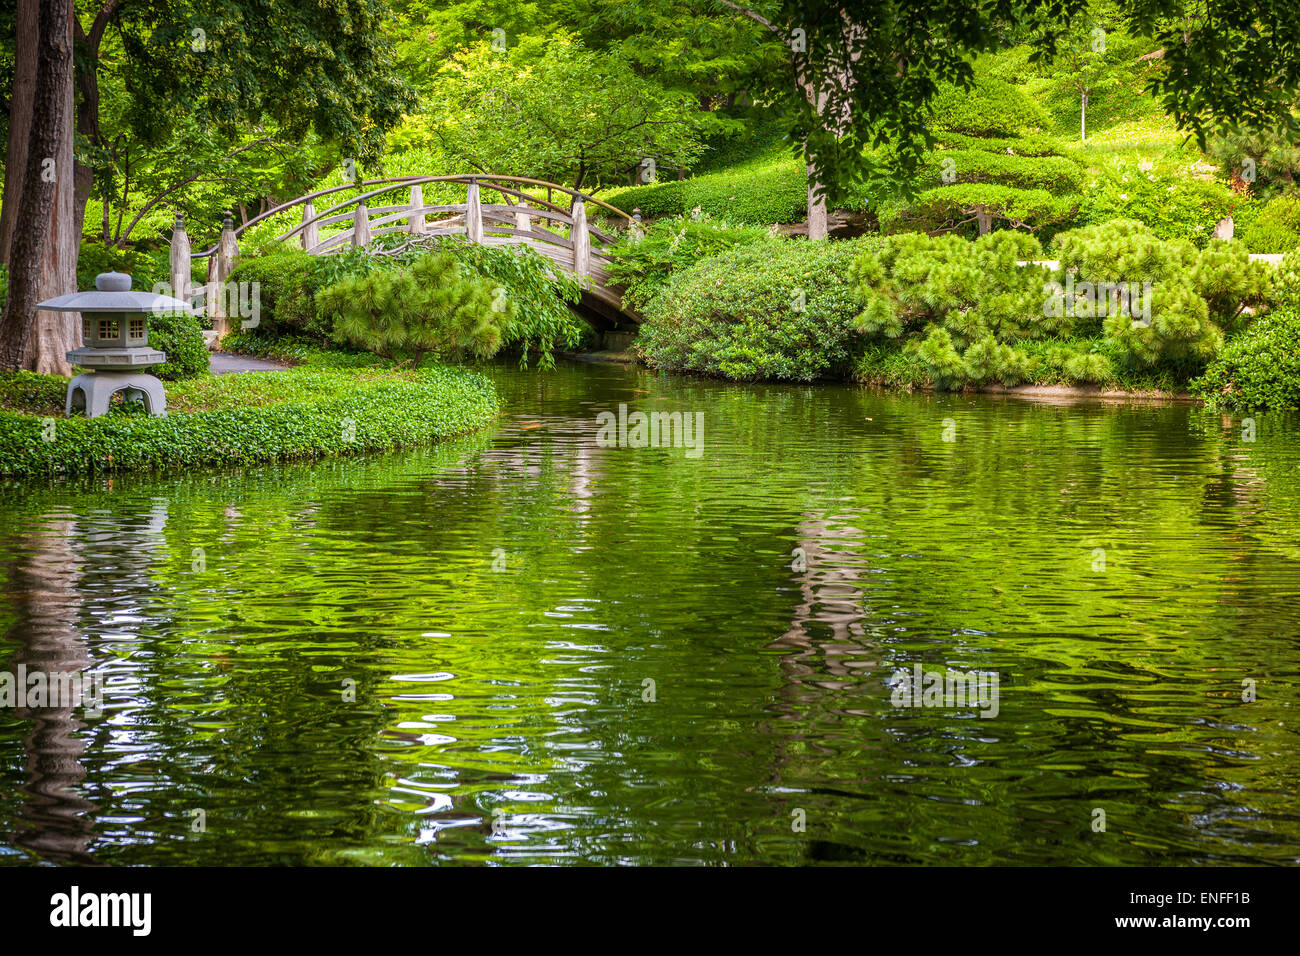 Quiet And Tranquil Outdoor Nature Scene In Japanese Botanical